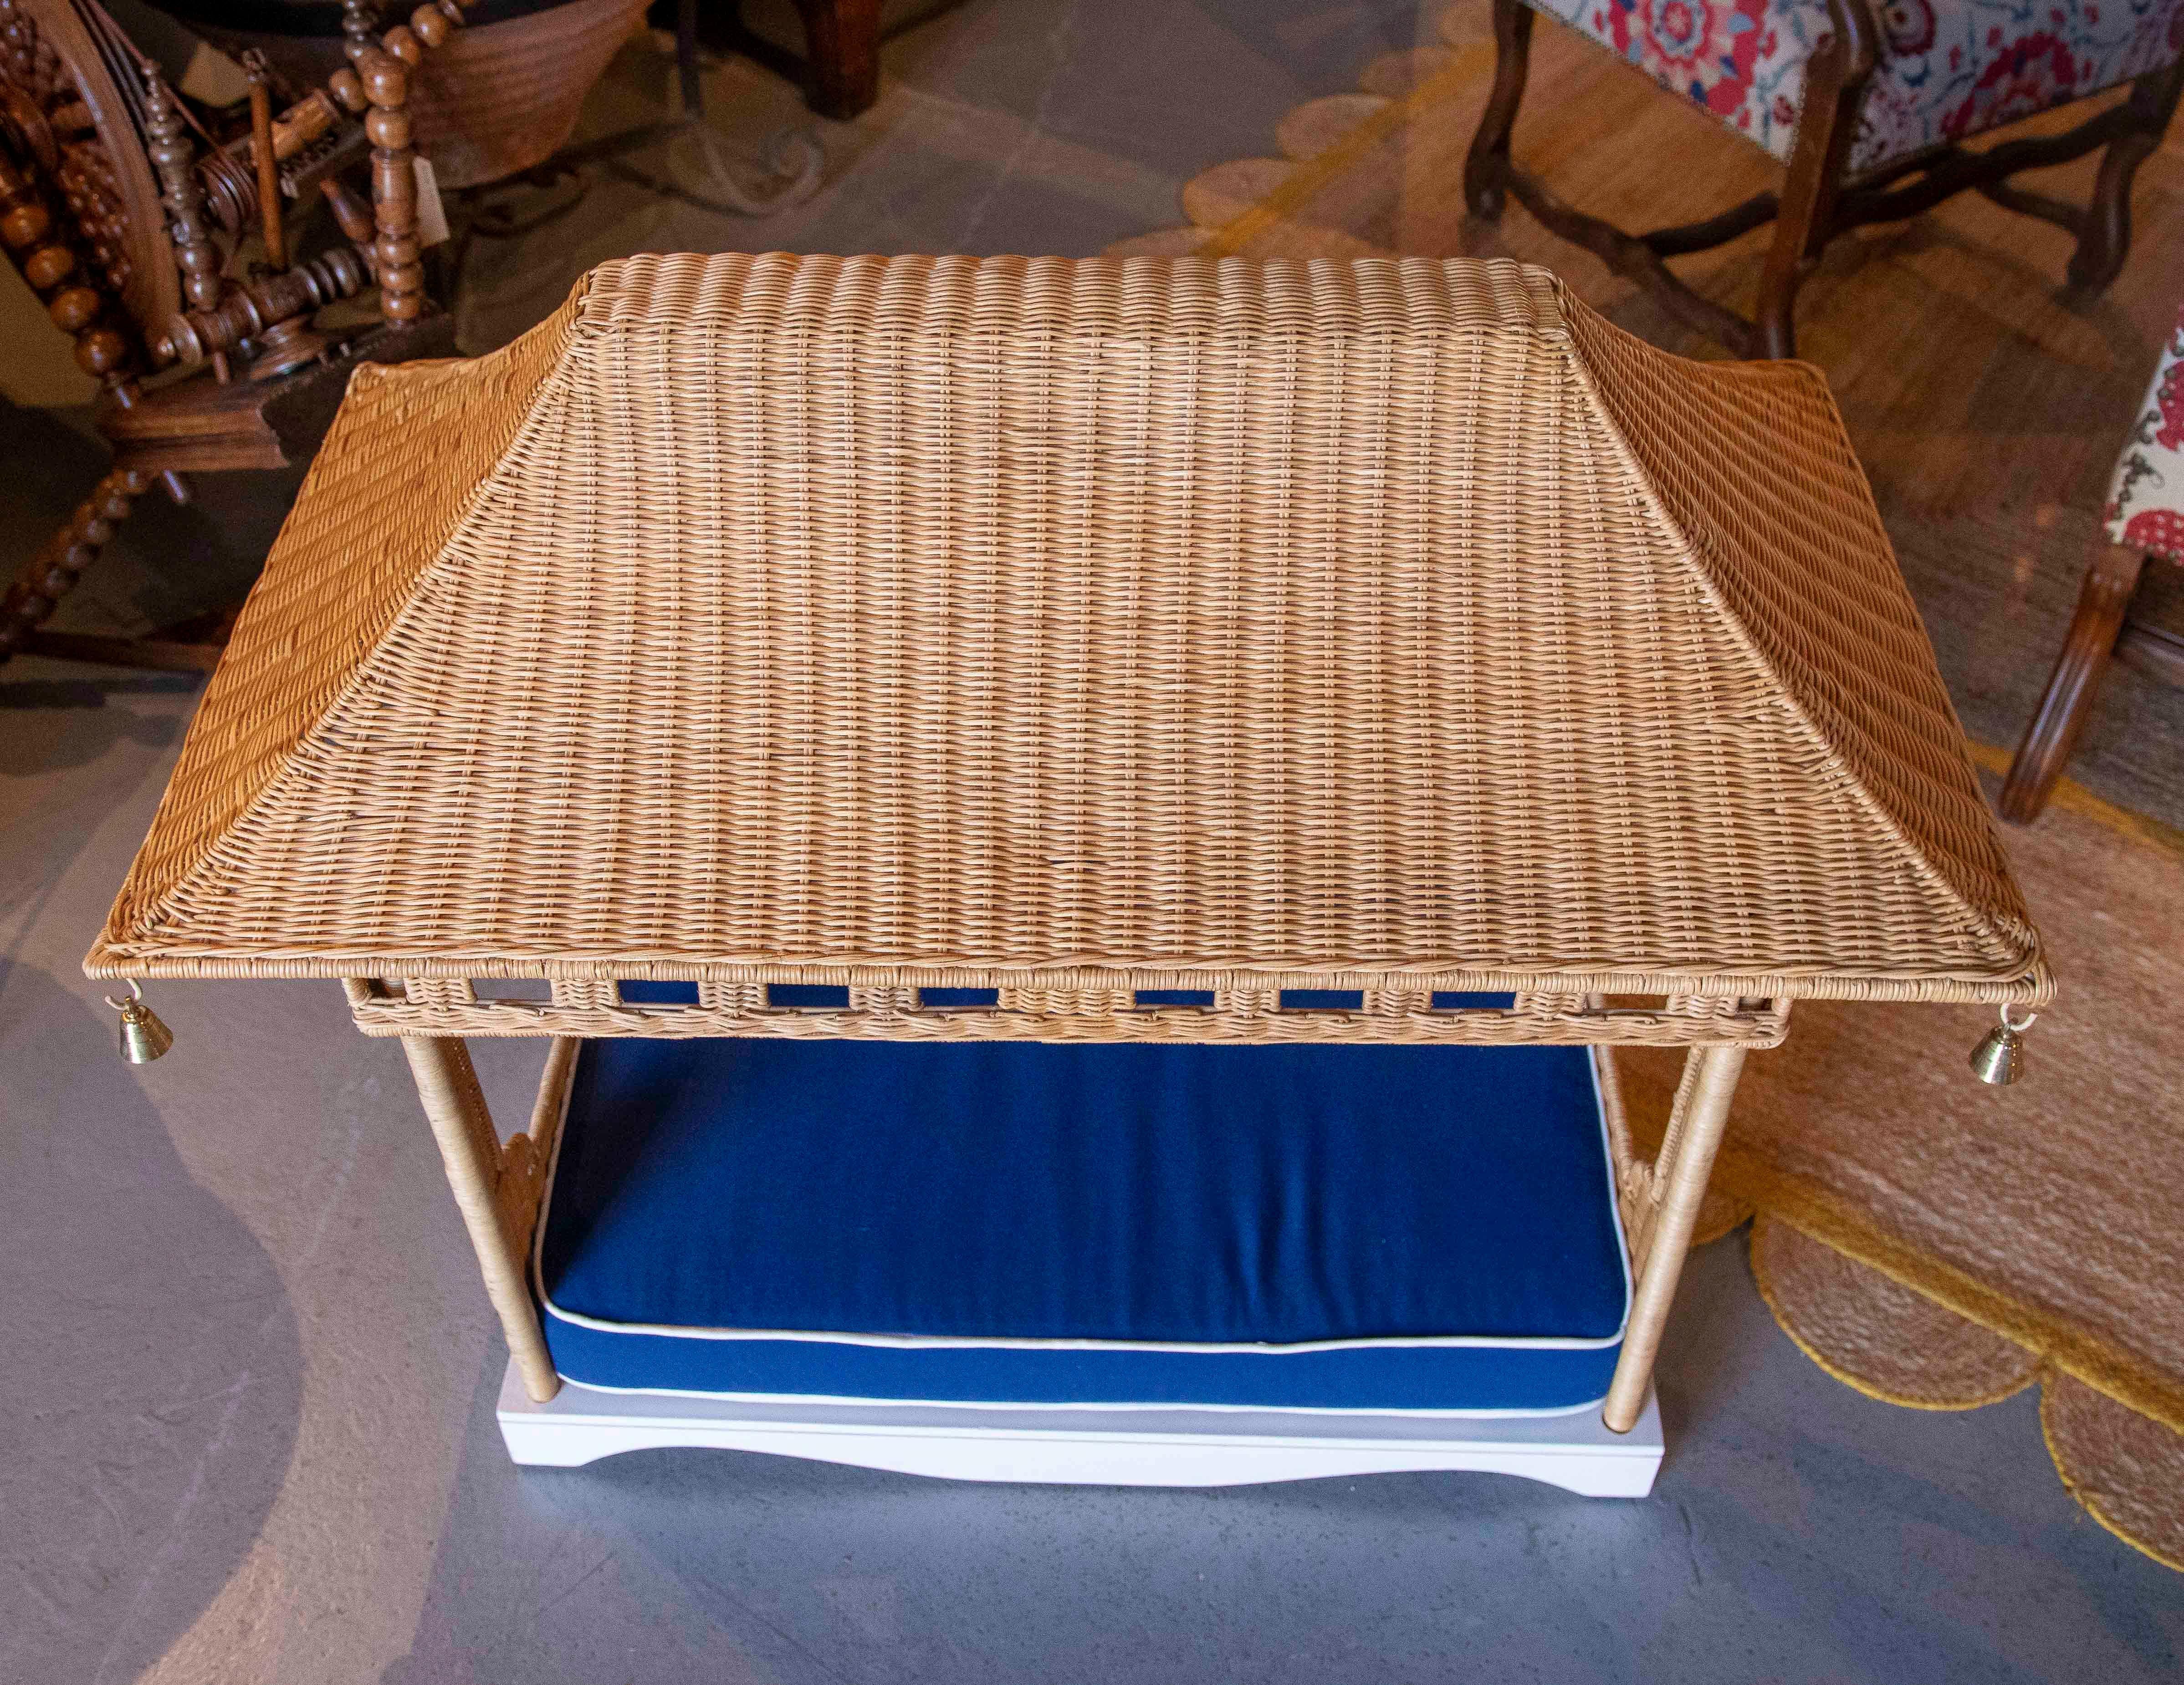 Wicker Dog or Pet Bed with wooden Base and Waterproof Fabric in Blue Color